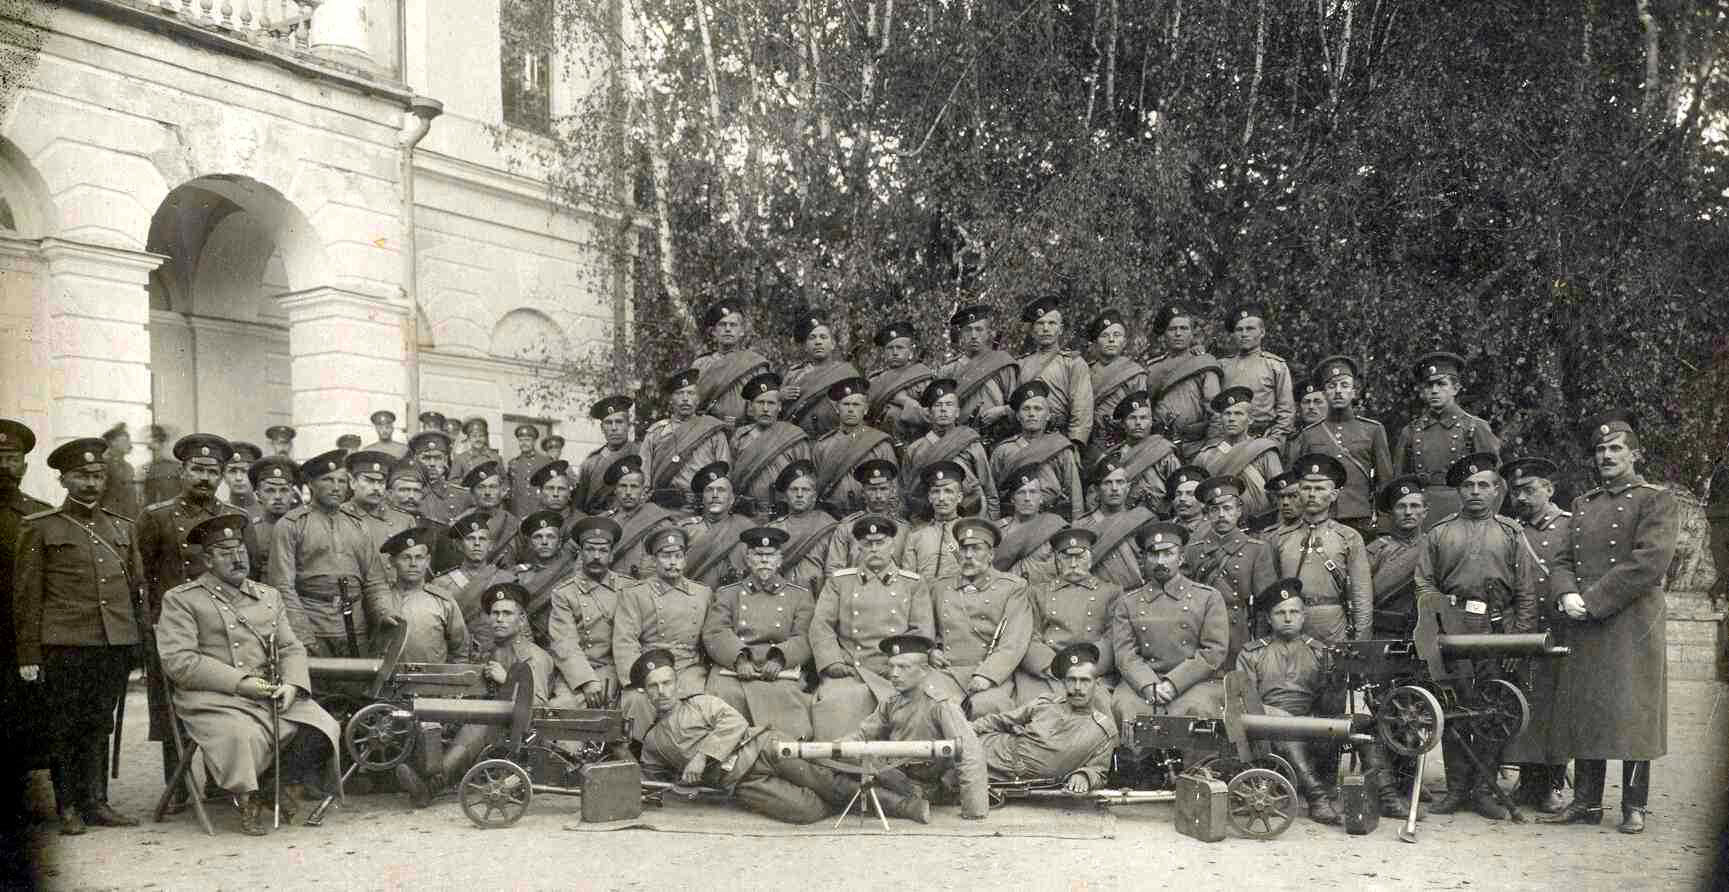 Officers of the 88th Petrovsky Infantry Regiment in 1911.